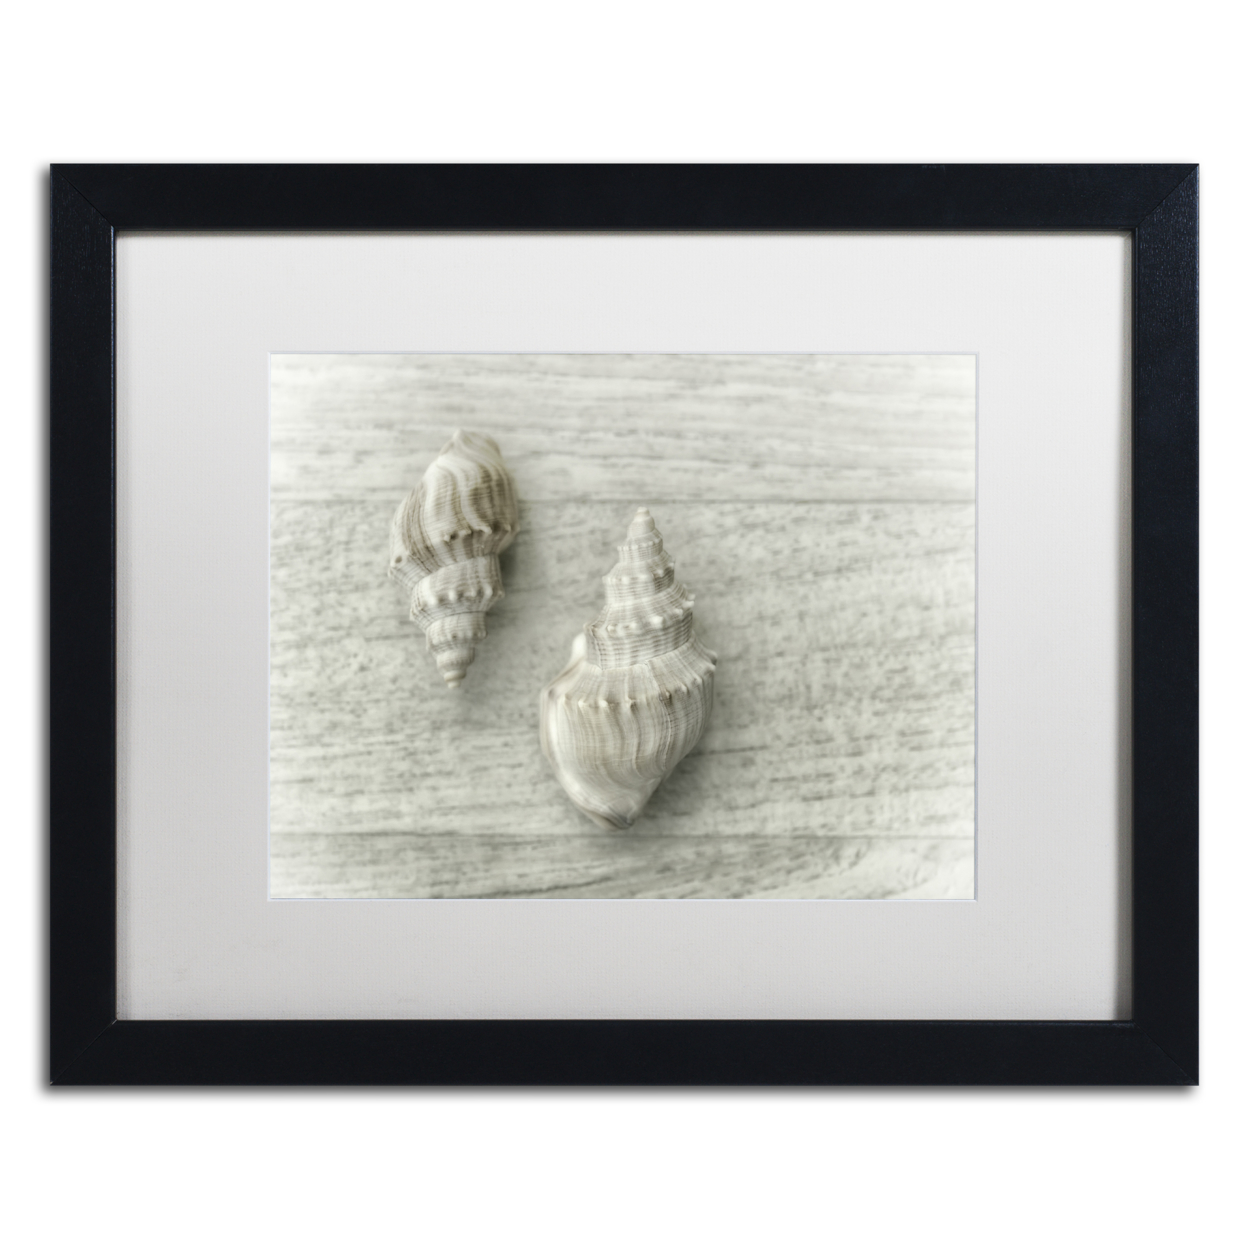 Cora Niele 'Two Cancellaria Shells' Black Wooden Framed Art 18 X 22 Inches